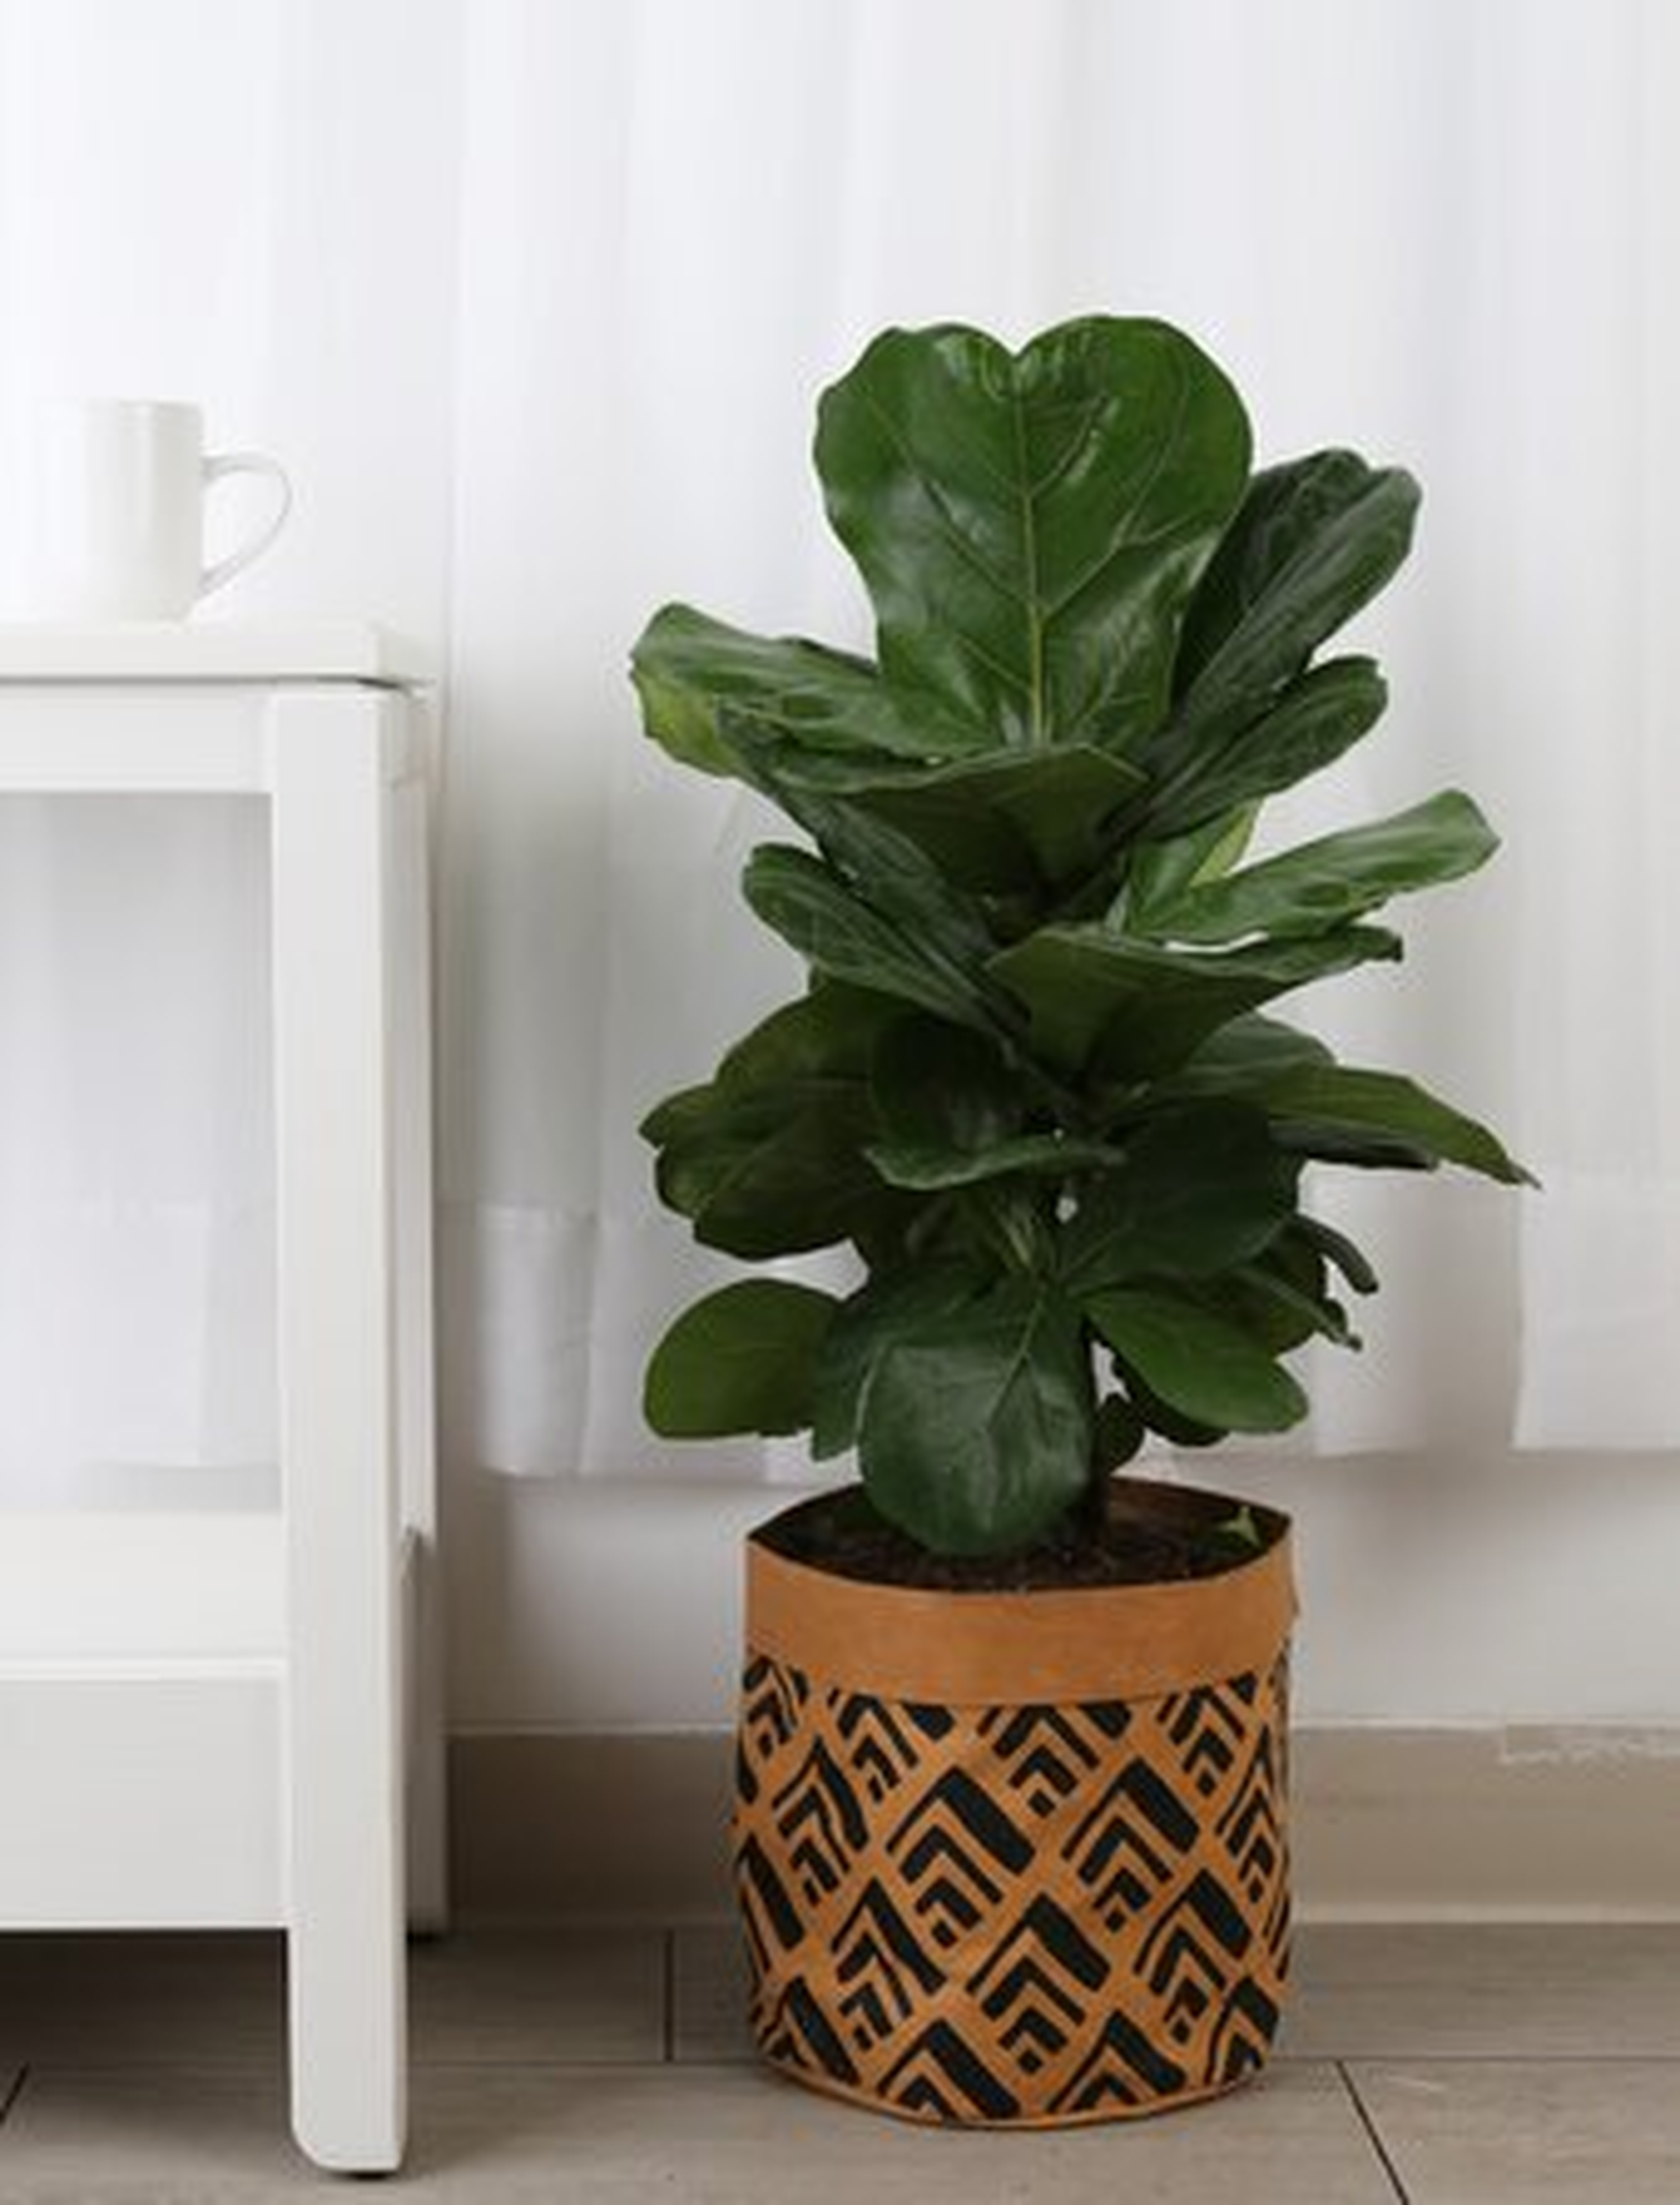 Costa Farms 10'' Fiddle Leaf Fig Plant Floor Plant in a Washable Paper Basket with Air Purifying Qualities - Wayfair